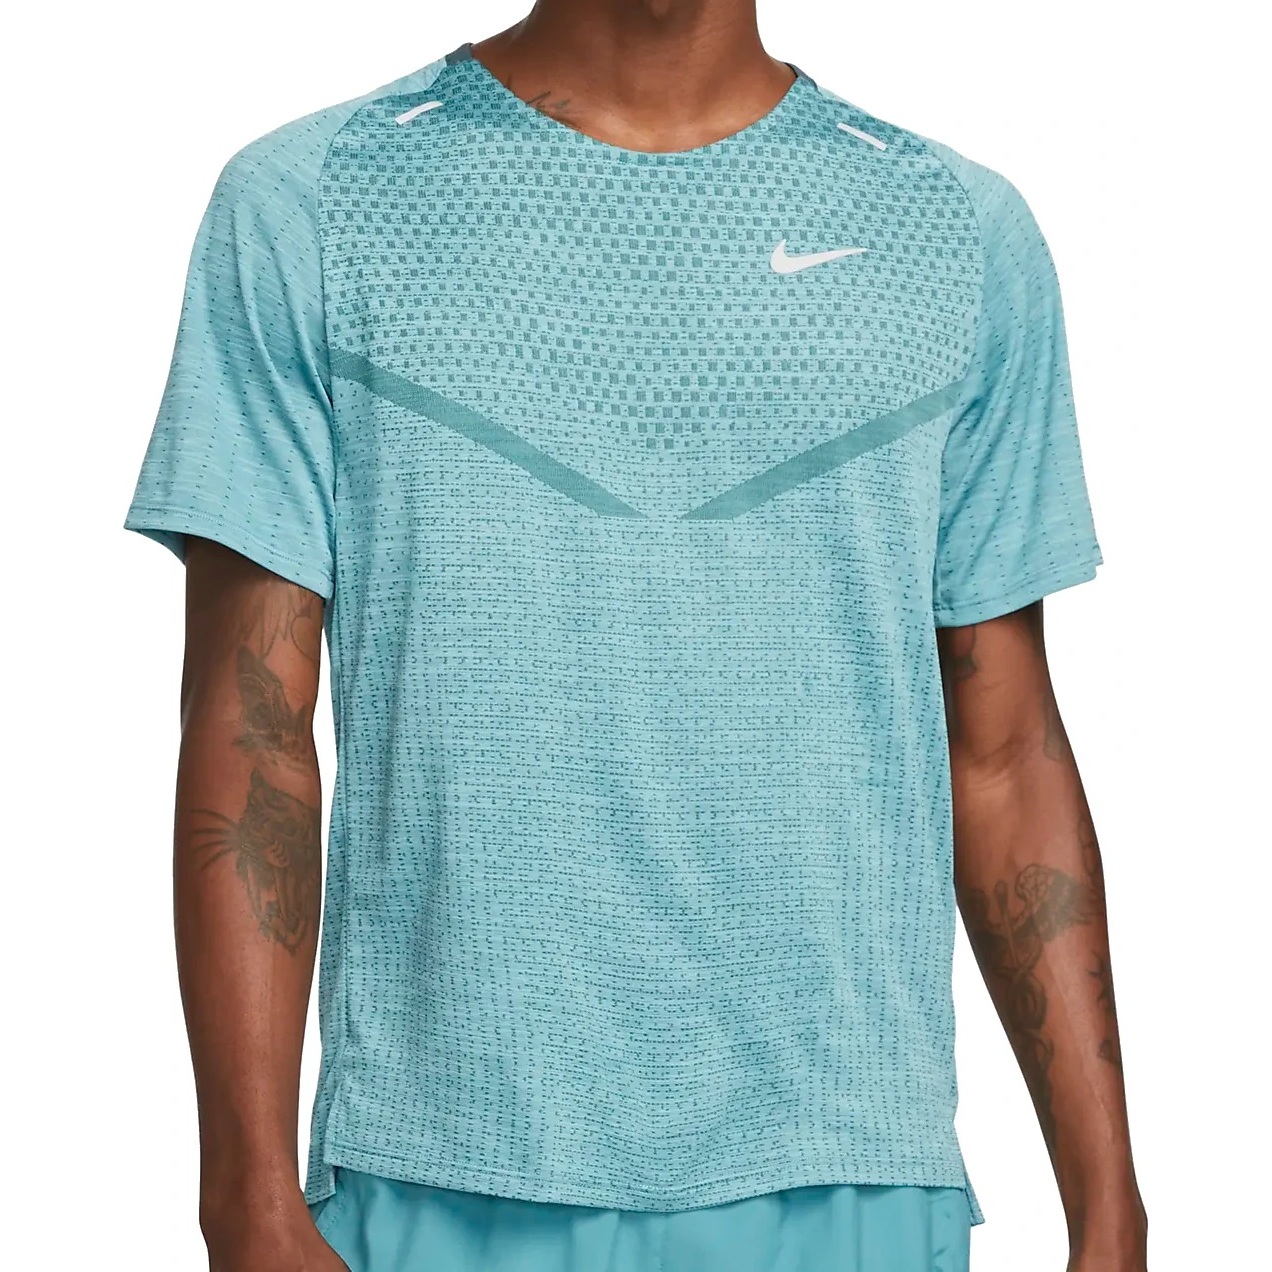 Picture of Nike Dri-Fit ADV Techknit Ultra Short-Sleeve Running Top Men - faded spruce/reflective silver DM4753-309